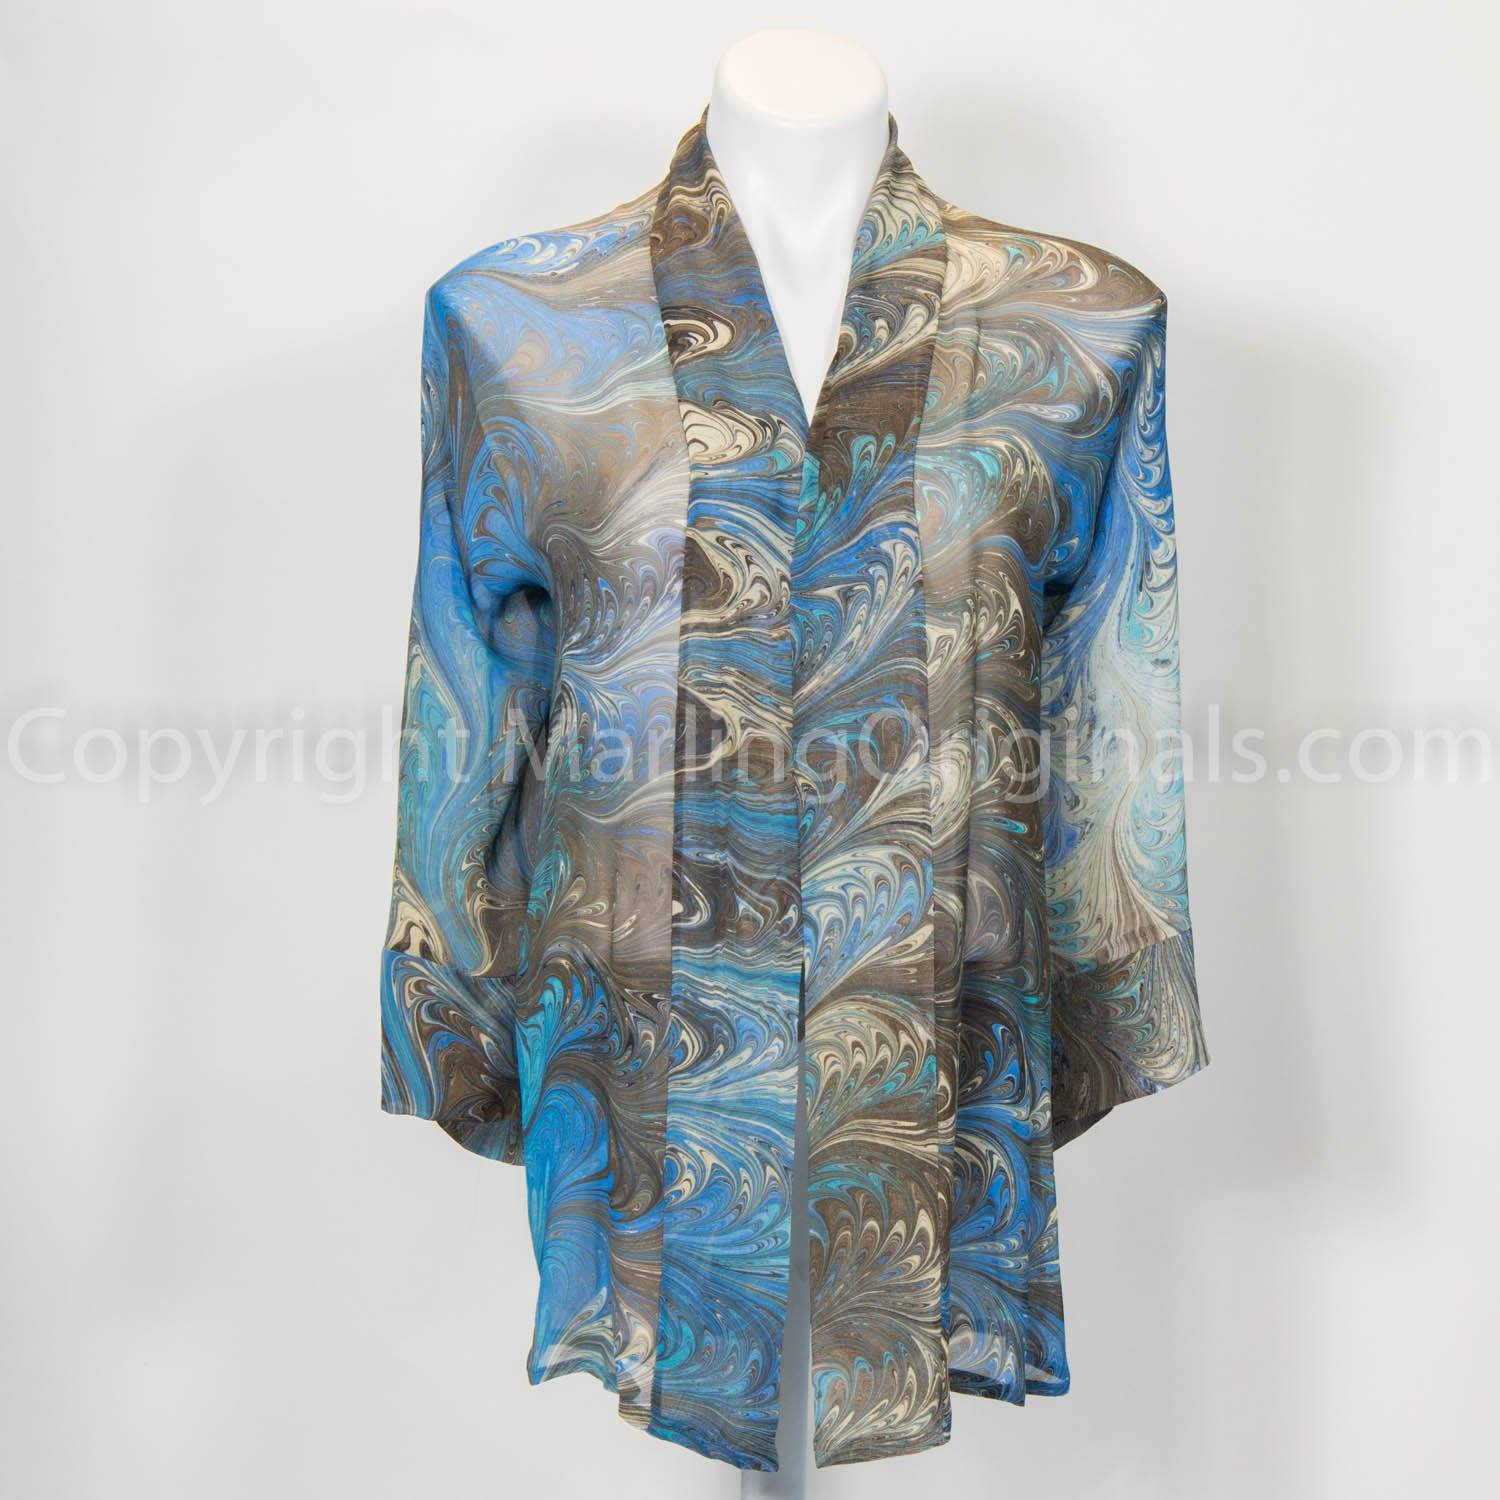 silk kimono jacket marbled in blues with brown and cream.  sheer jacket with banded front